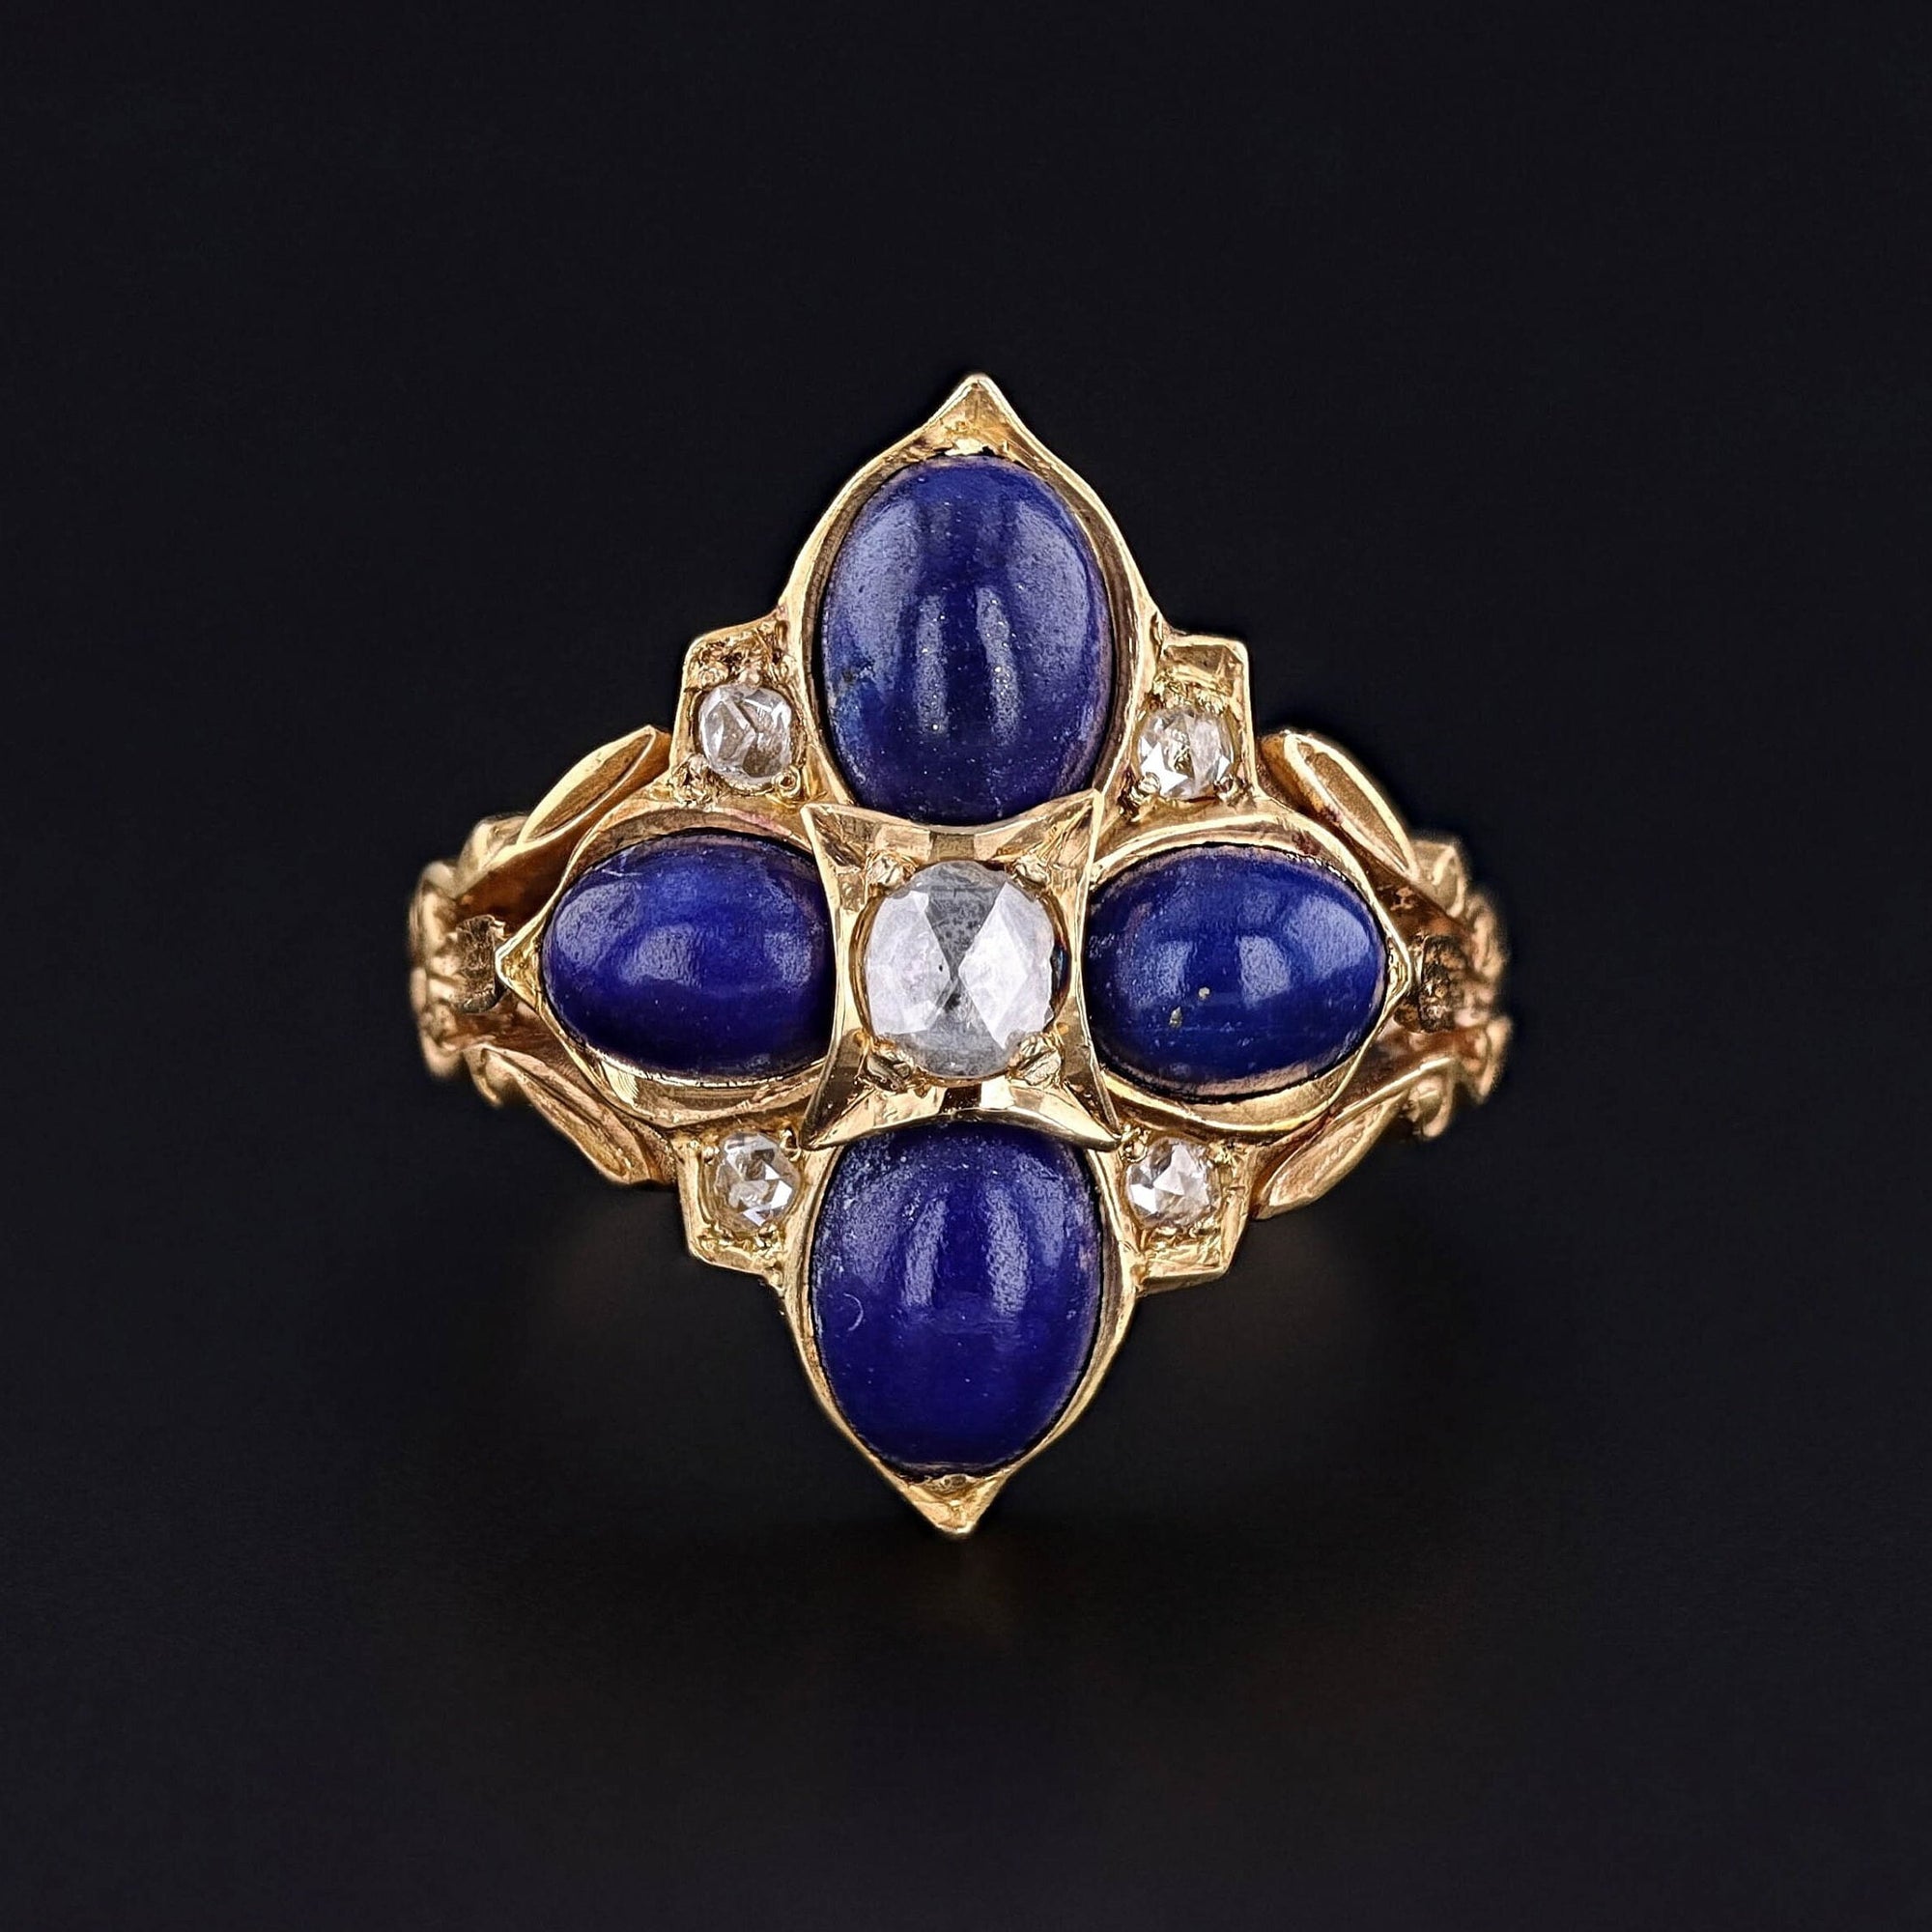 Antique Lapis Lazuli and Diamond Ring: Discover the exquisite charm of this antique ring dating back to the late 1800s. The 15ct gold ring is adorned with four vibrant lapis lazuli cabochons interspersed with lively rose cut diamonds.